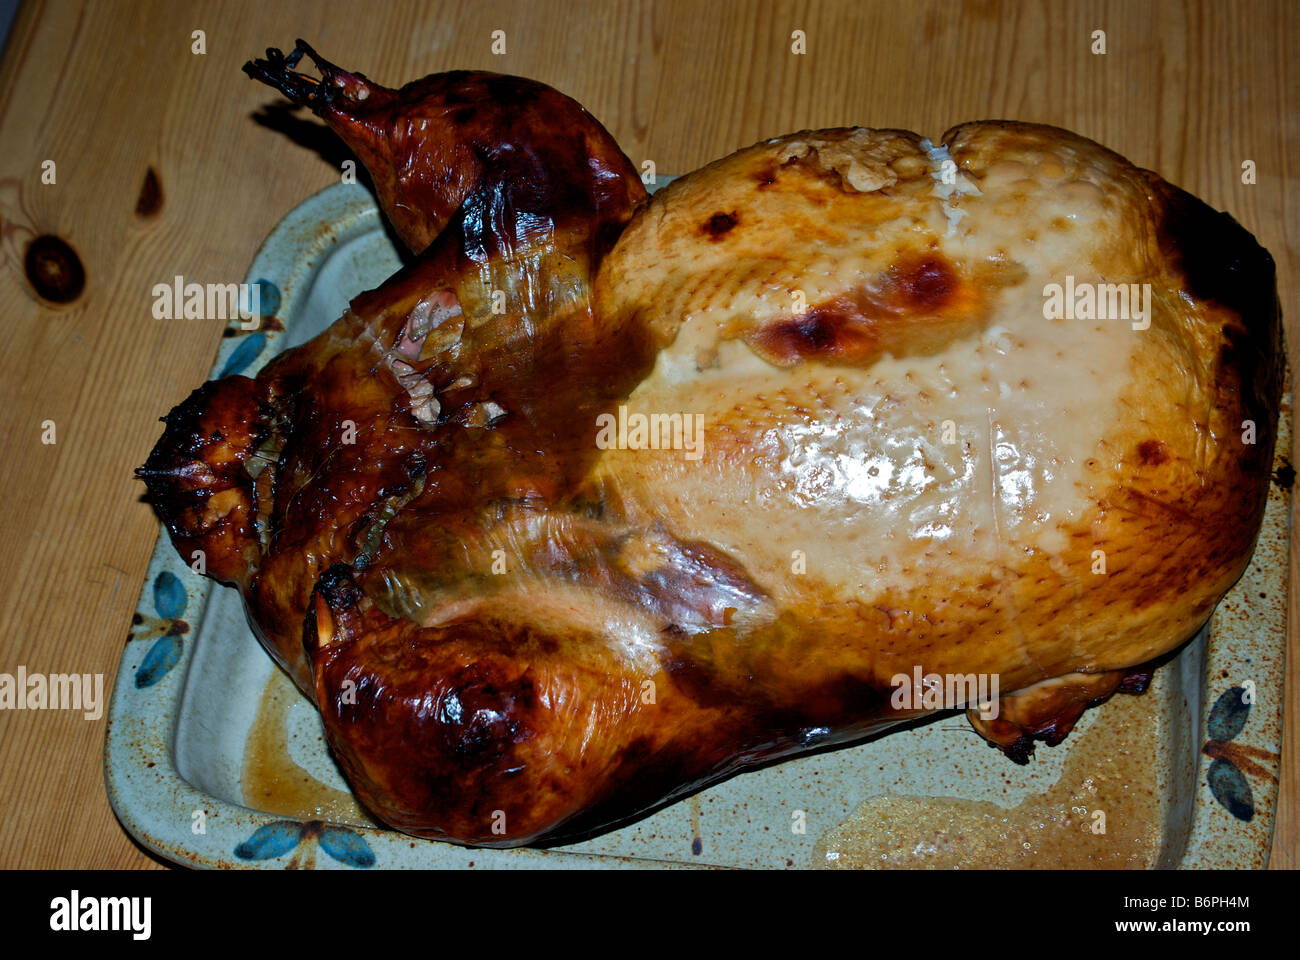 Cooked oven roasted stuffed completely boneless turkey ready for slicing and serving no carving around bones needed Stock Photo